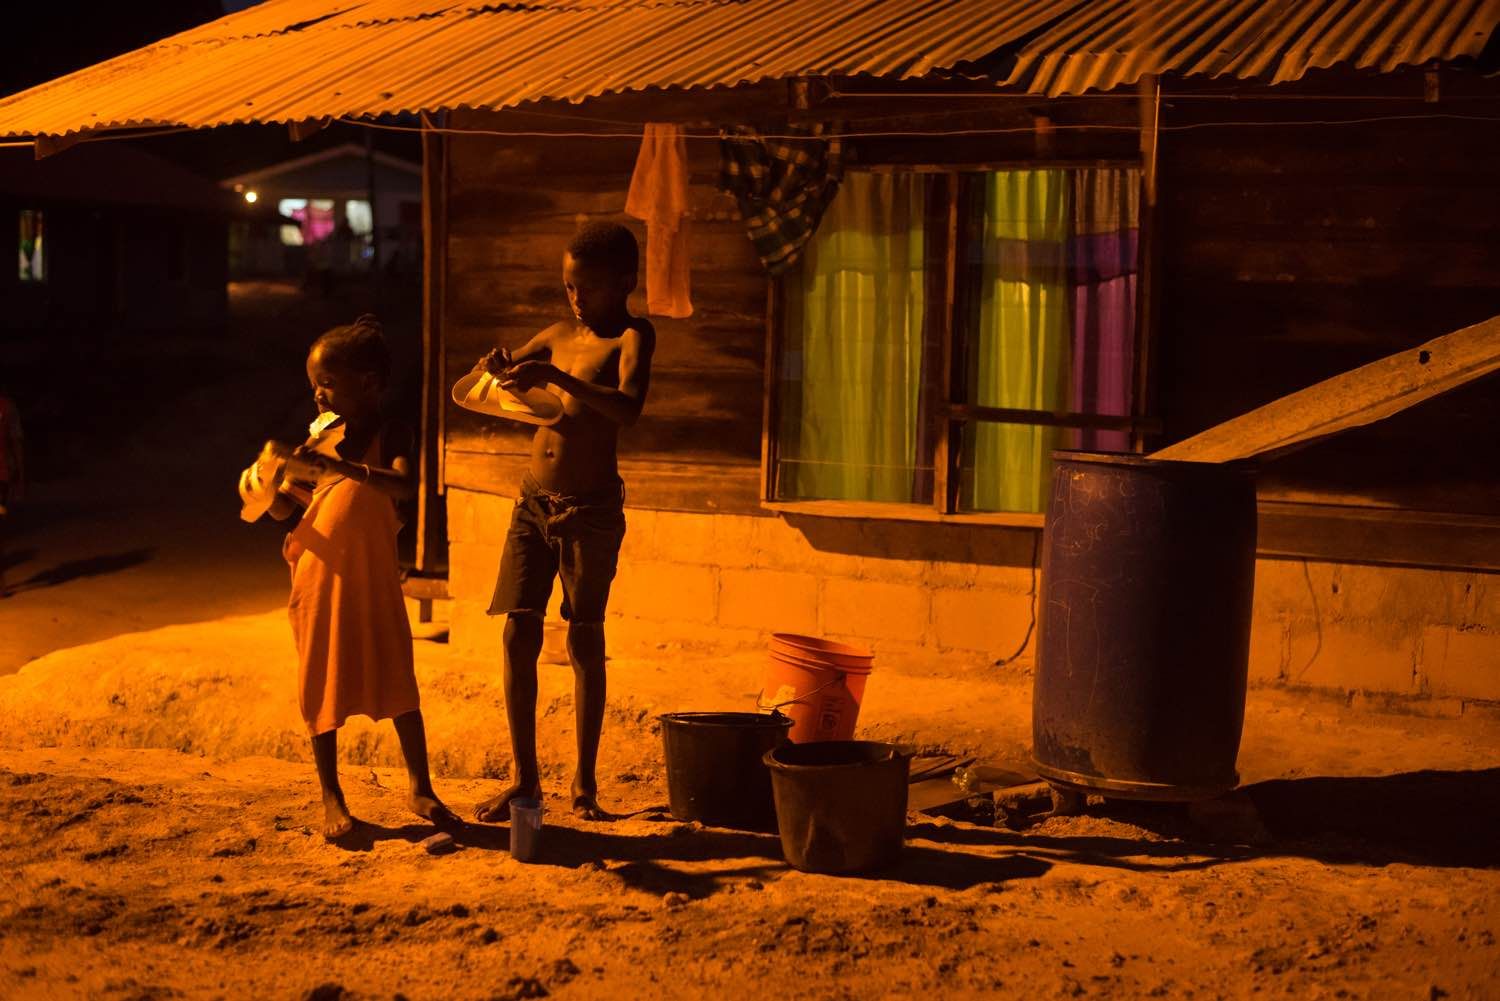 Children clean their shoes for school in the orange glow of a street light on Wednesday, March 15, 2017 in the village of Adjuma Kondre. It will take Alcoa years to repair thousands of acres of mined land around the village. Image by Stephanie Strasburg. Suriname, 2017.